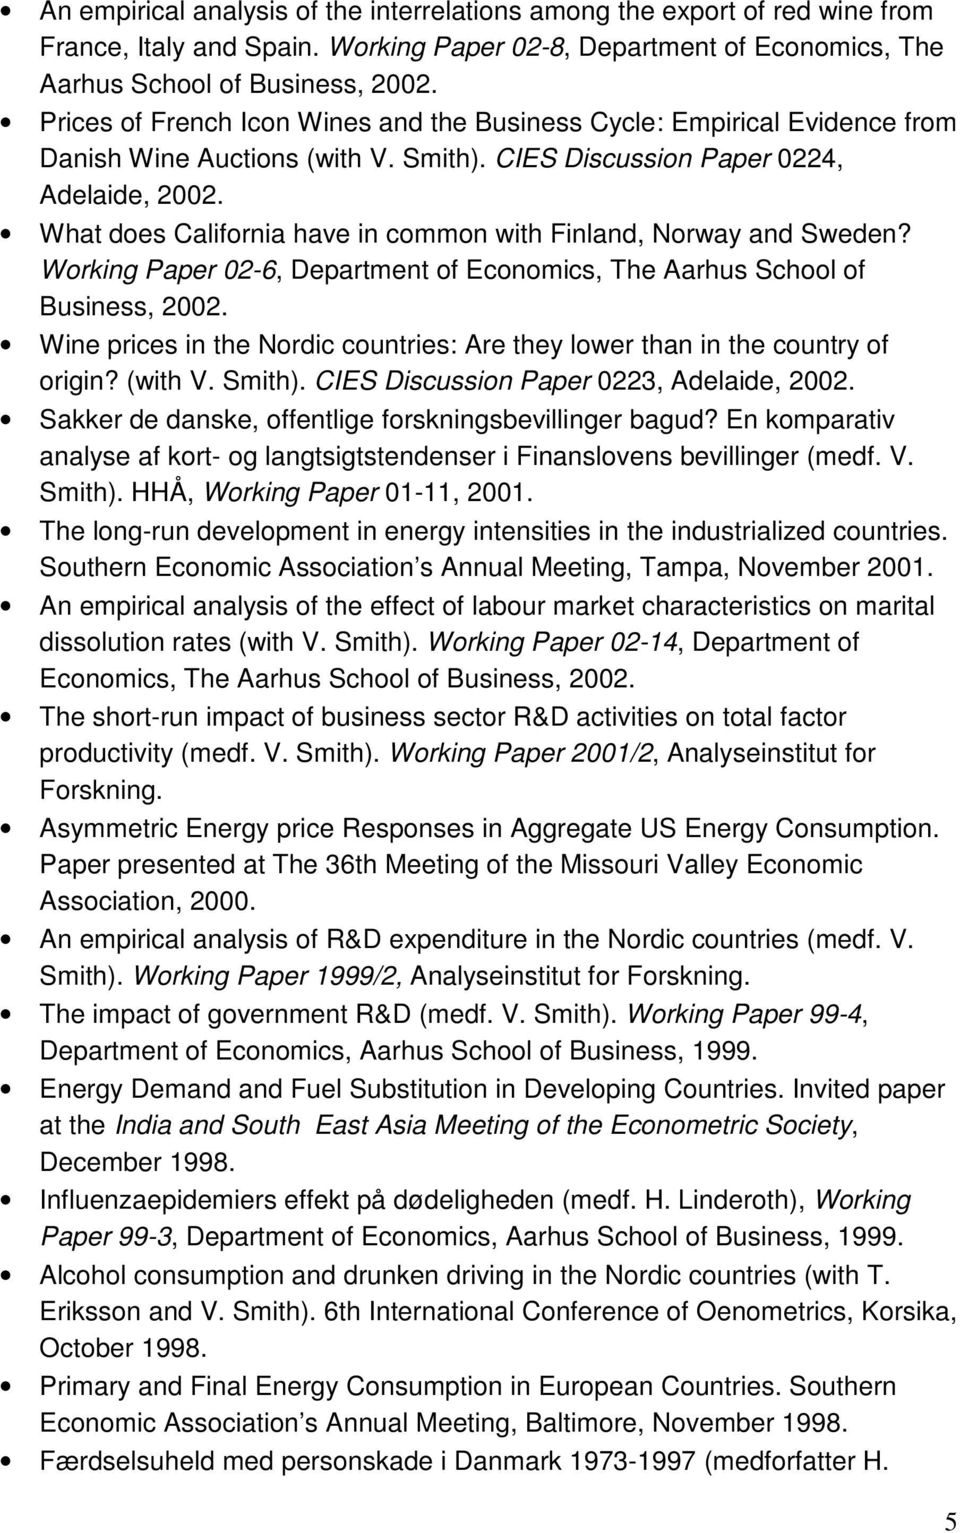 What does California have in common with Finland, Norway and Sweden? Working Paper 02-6, Department of Economics, The Aarhus School of Business, 2002.